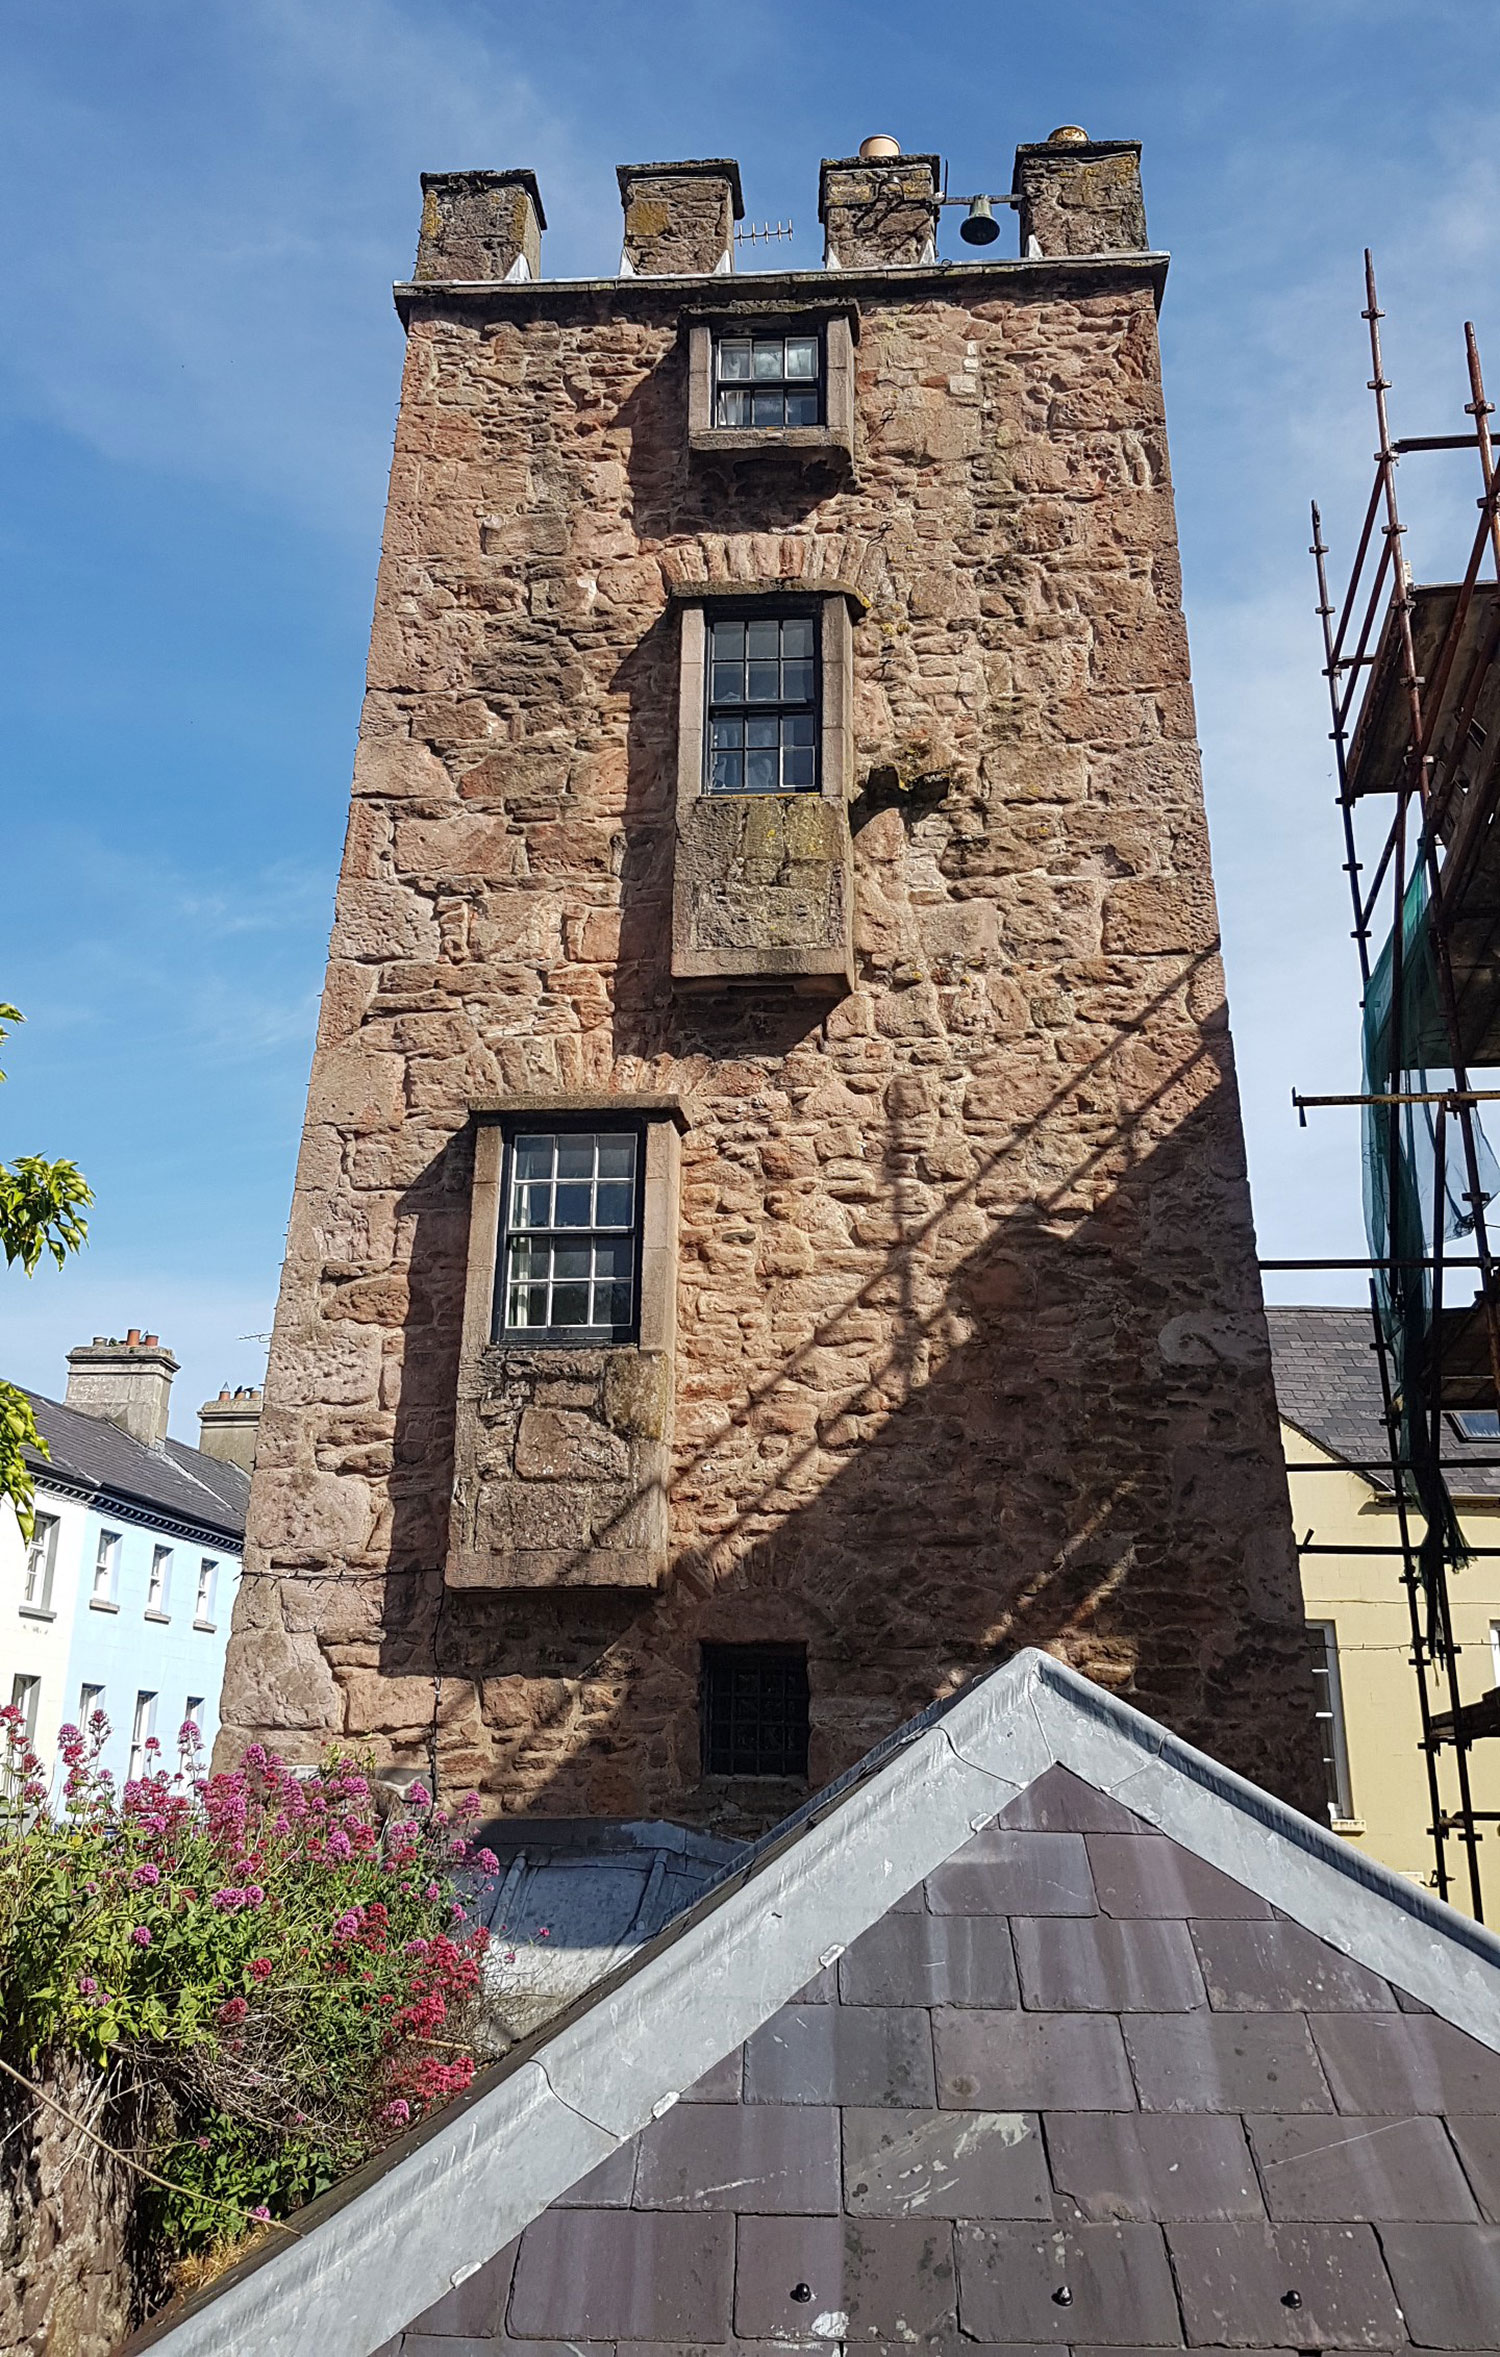 The Curfew Tower